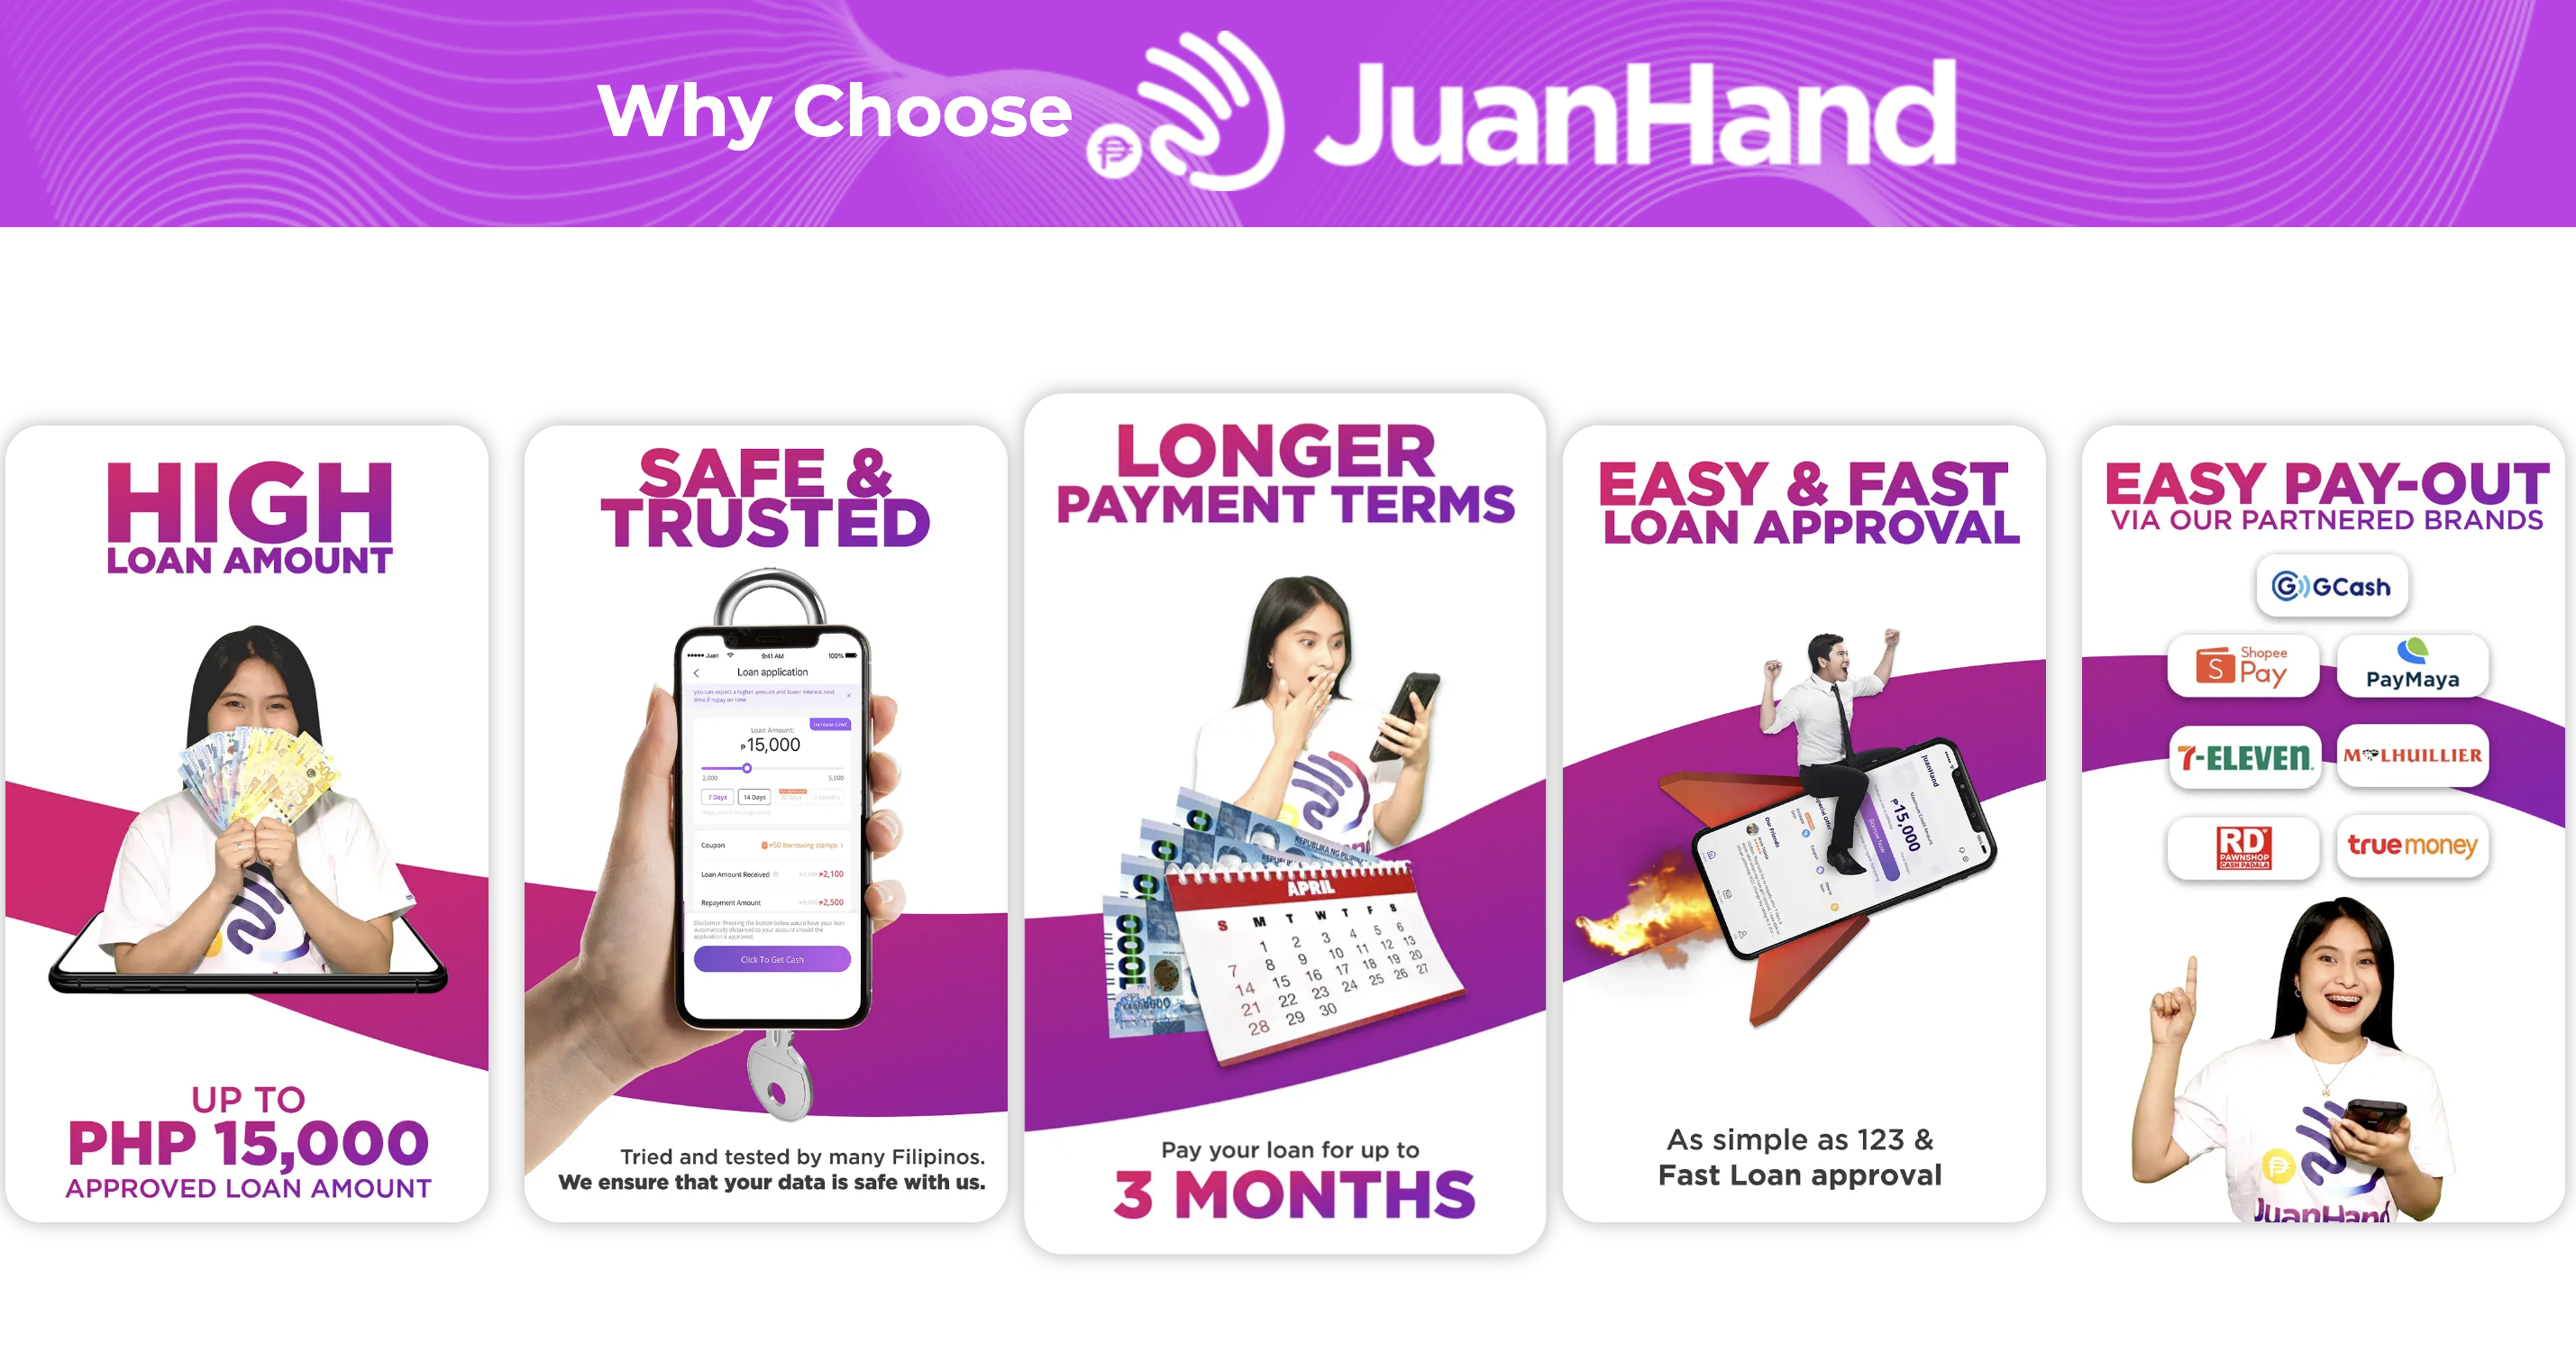 juanhand loan app review - why should i apply for a juanhand loan